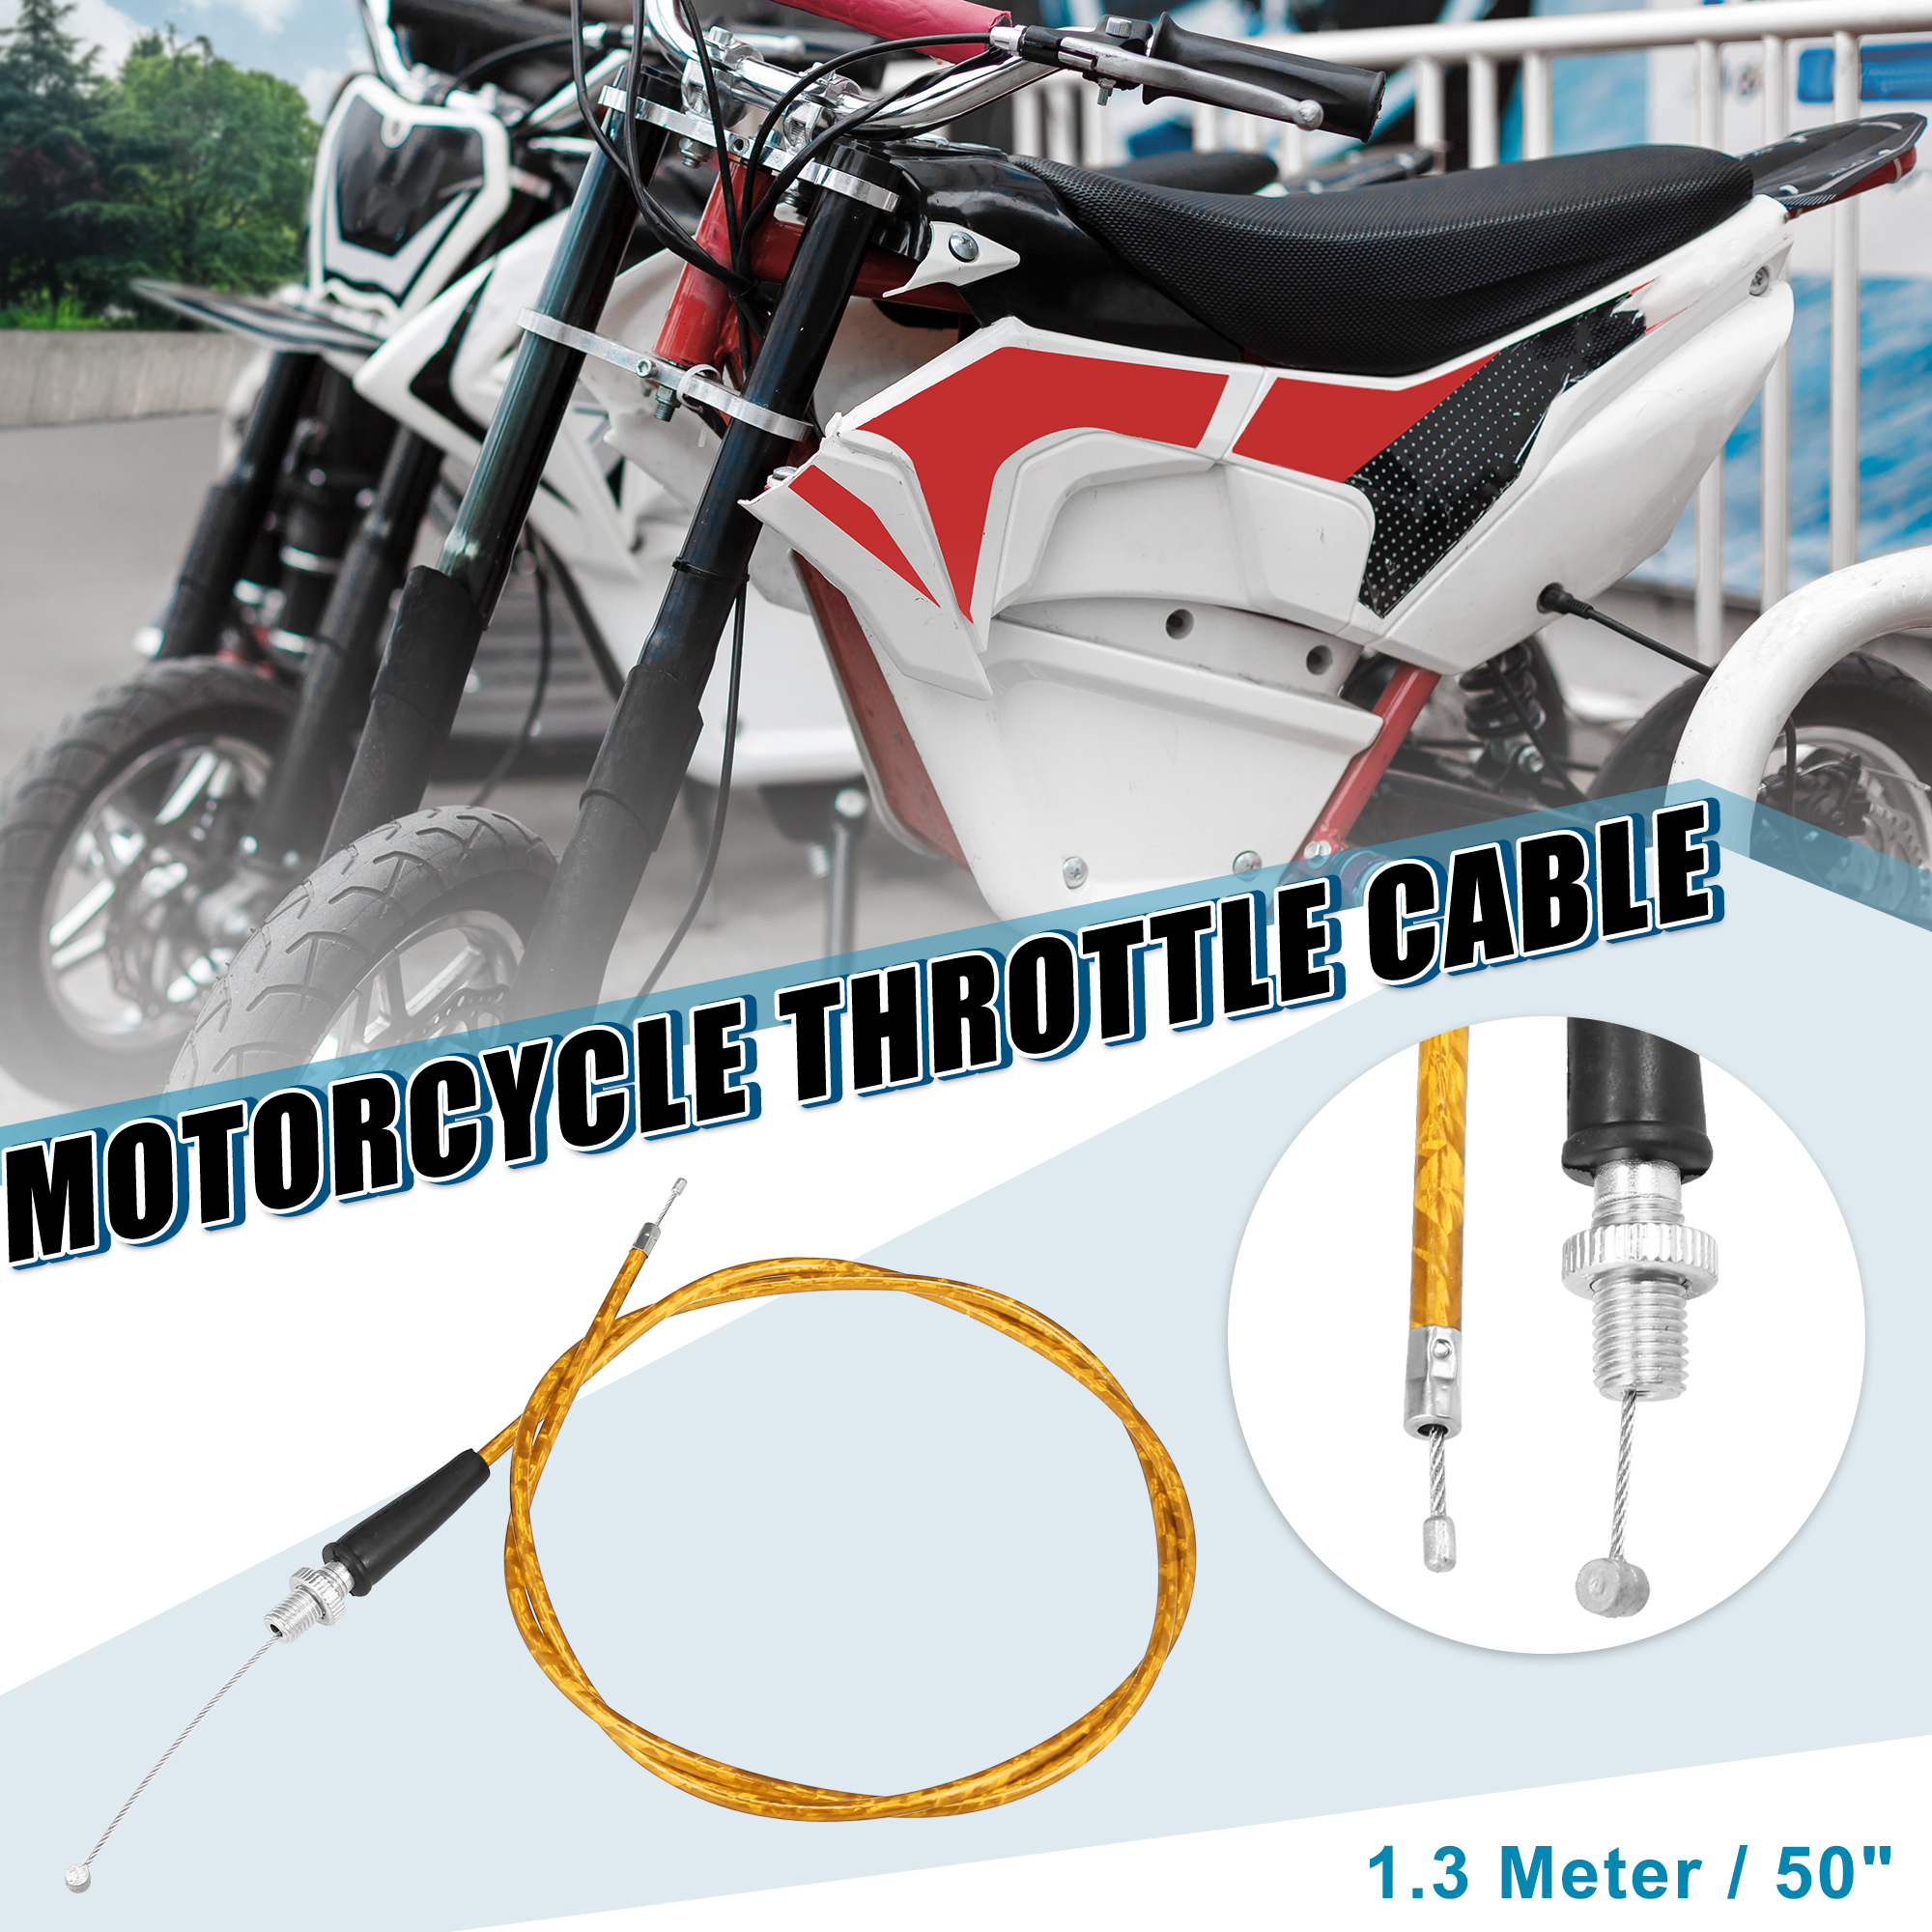 Unique Bargains Motorcycle Gas Throttle Cable 50 Inch for Mini Bike MB165 196cc 5.5hp Yellow